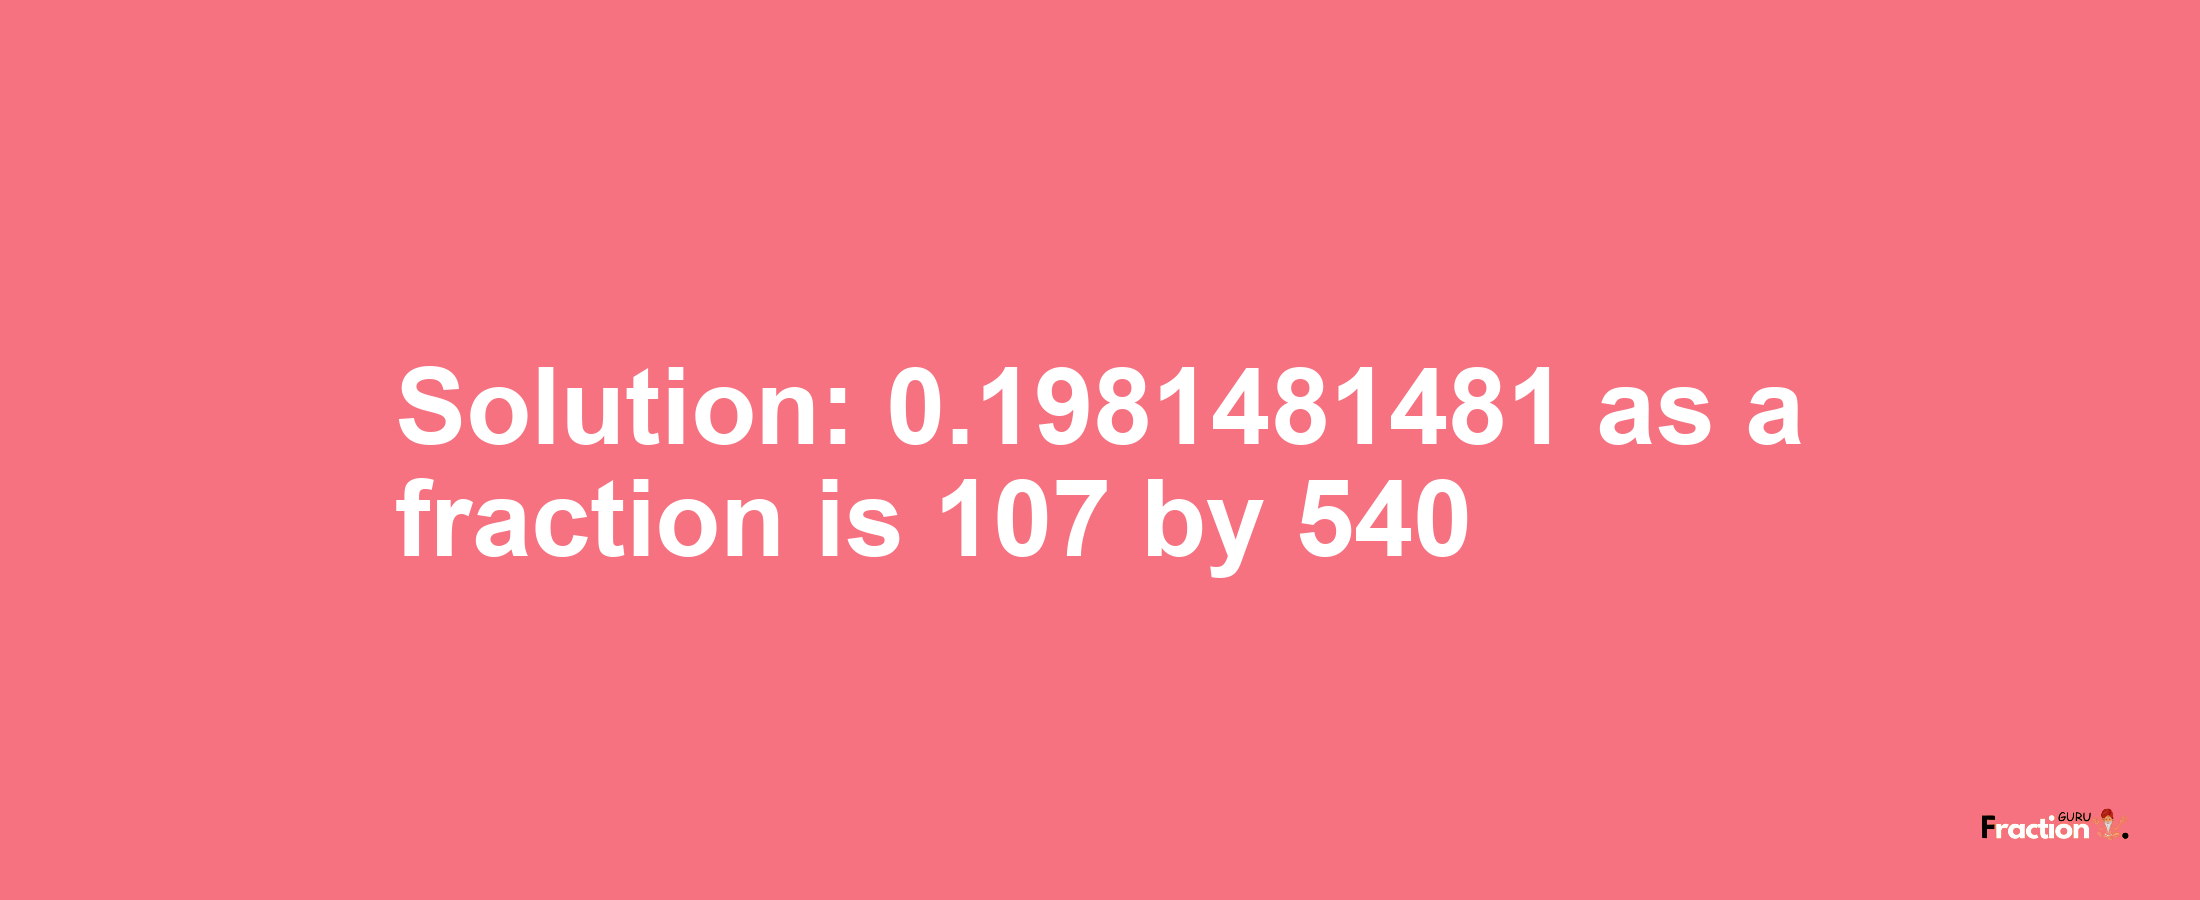 Solution:0.1981481481 as a fraction is 107/540